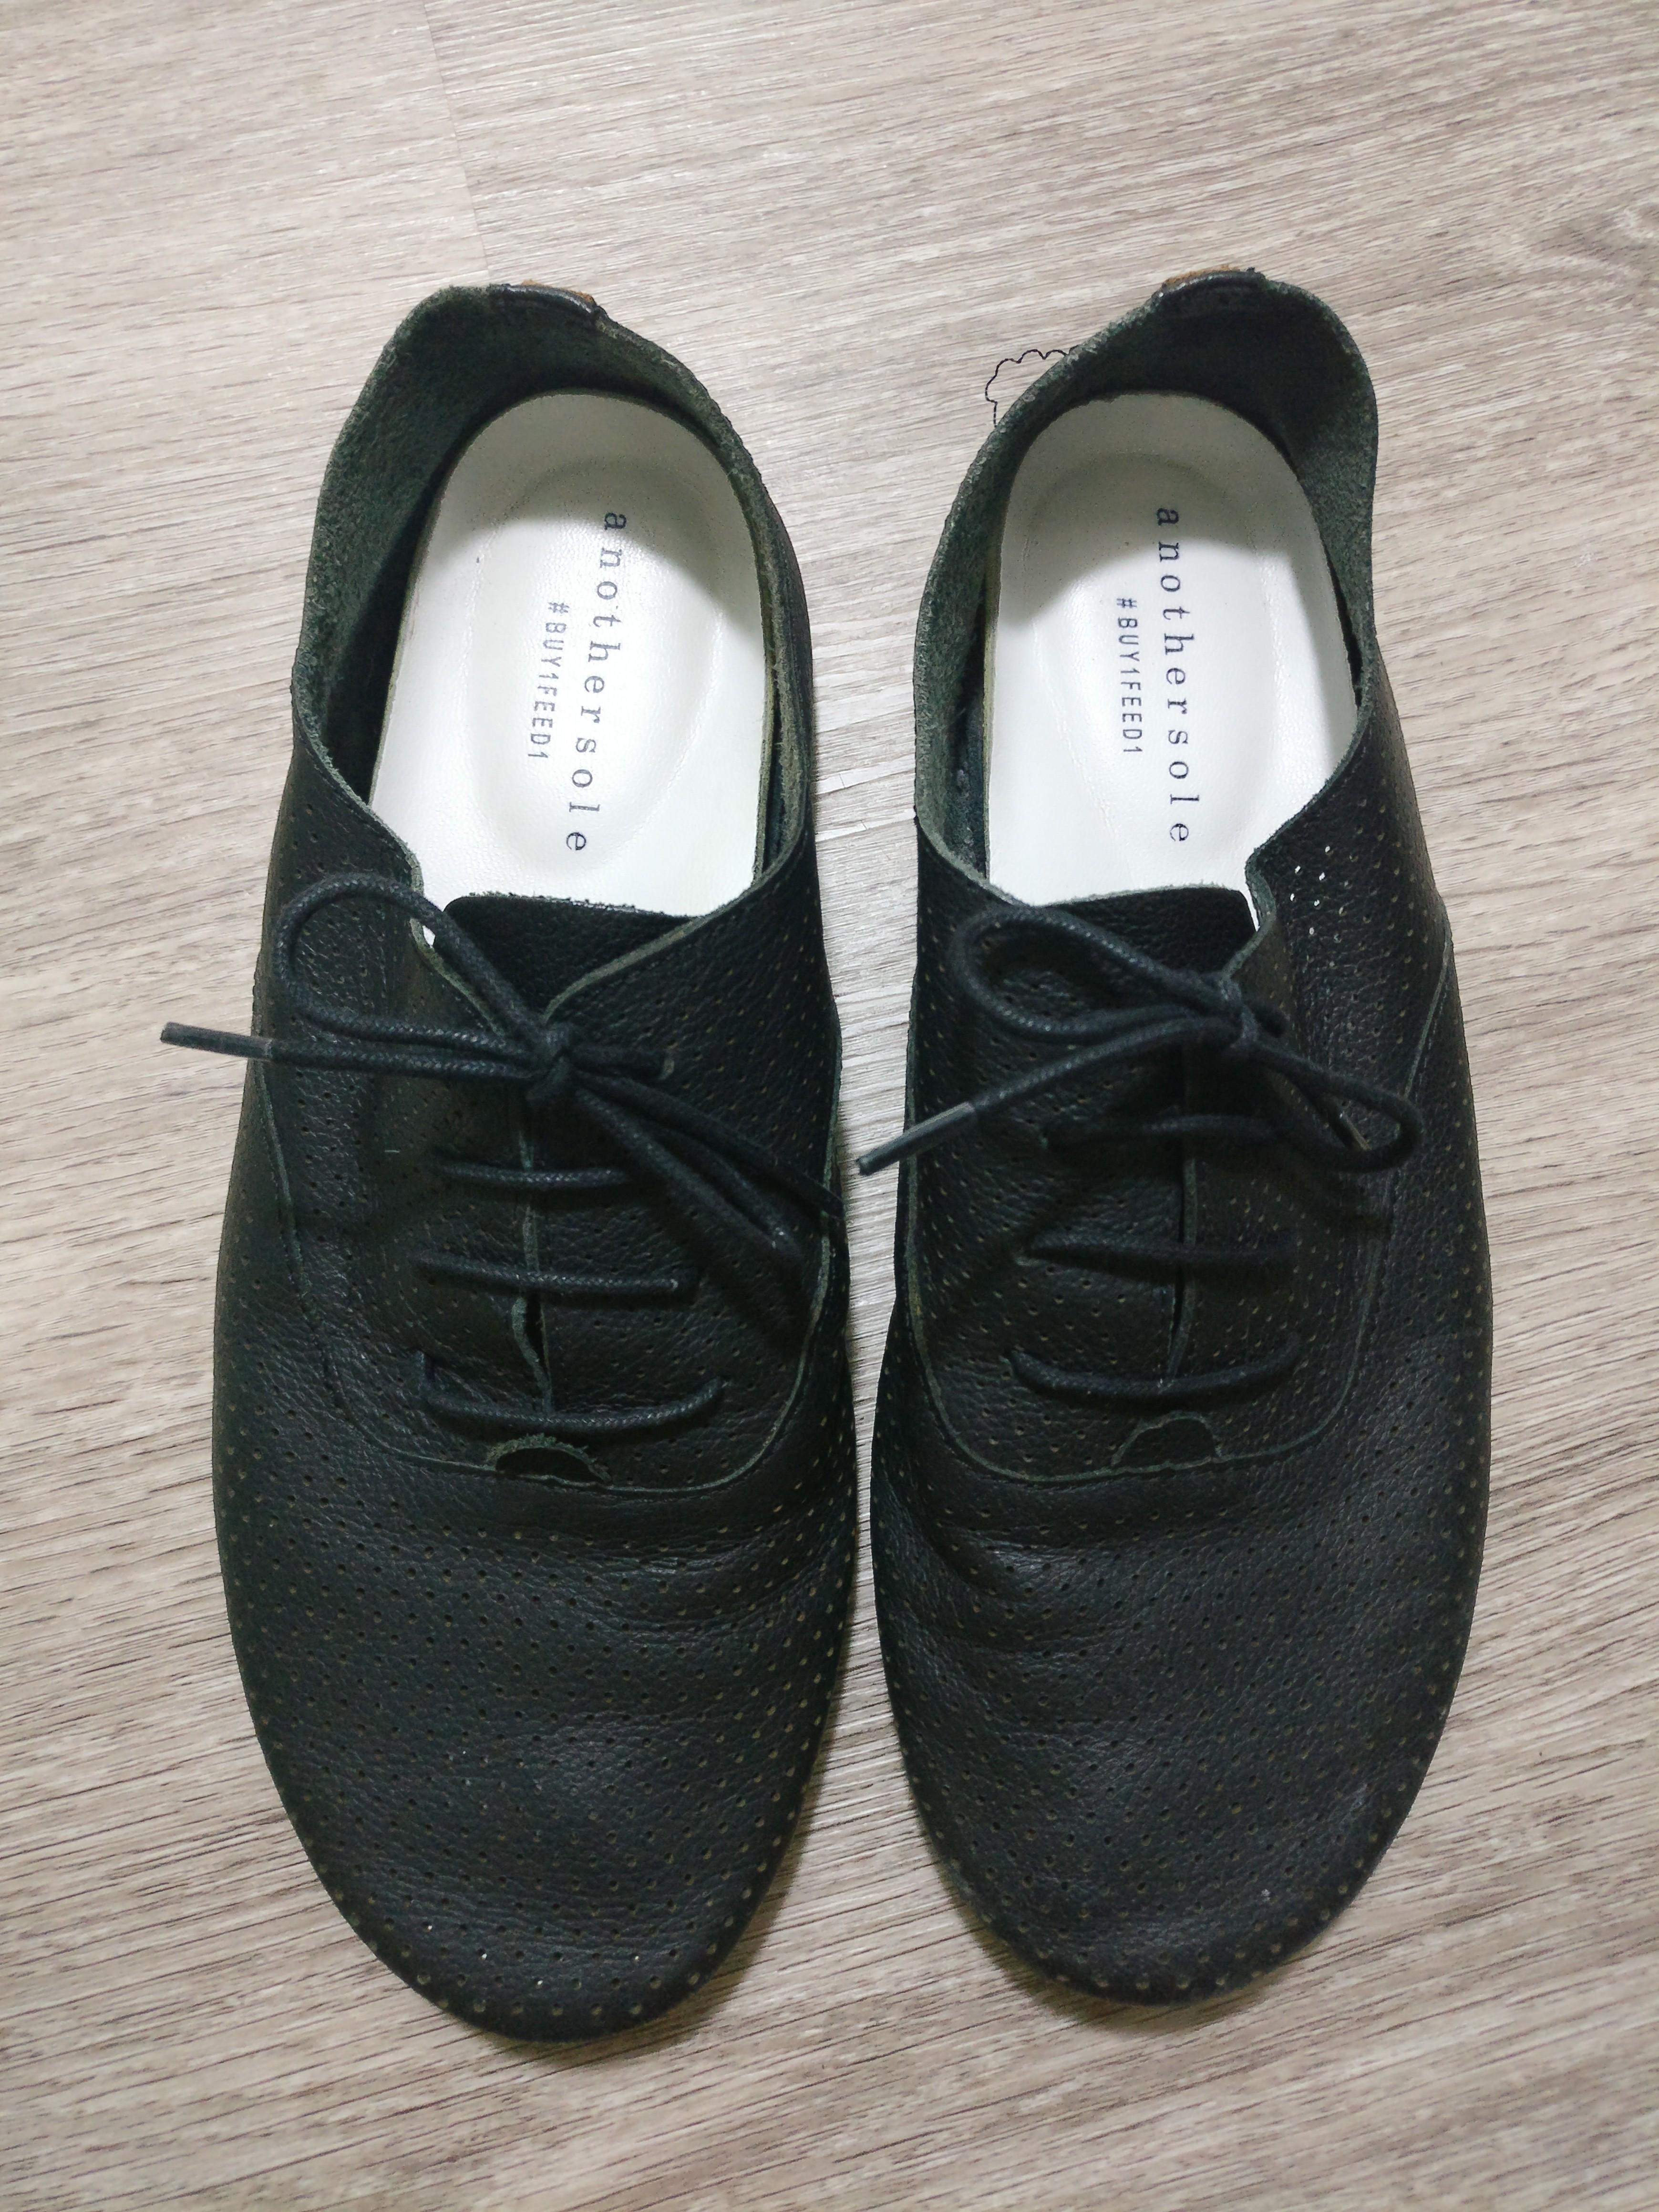 anothersole oxfords